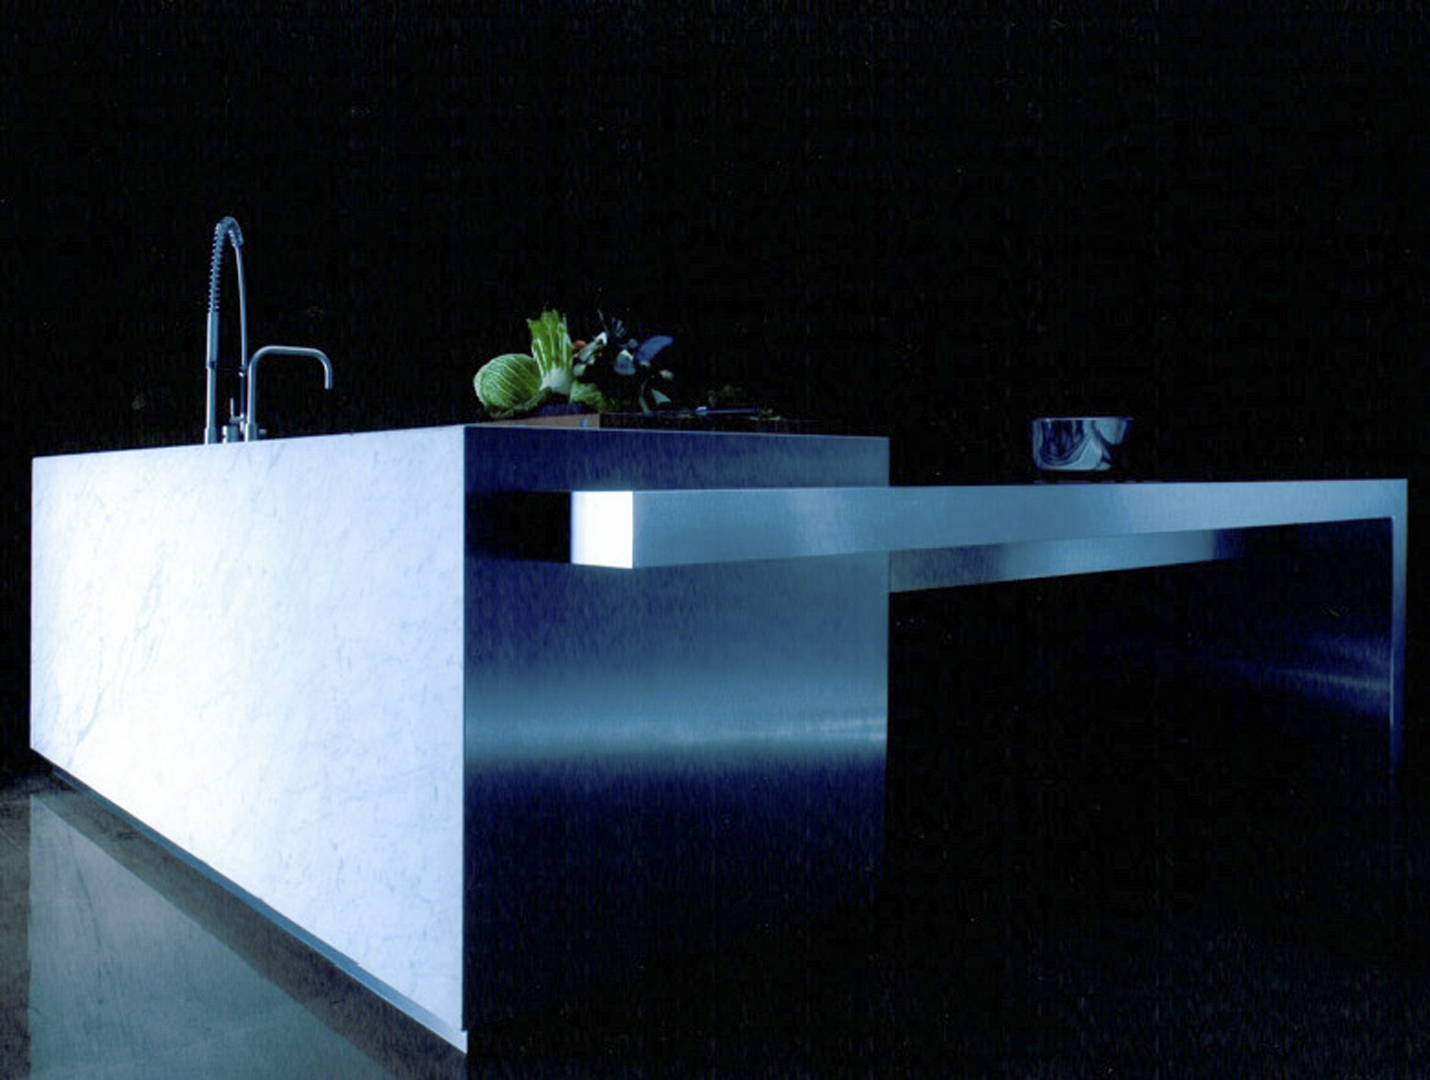 Strato_design_Non Plus Ultra_bespoke kitchen project in Milano_mat stainless steel_mat grey lacquer_Carrara marble_2002_29-96